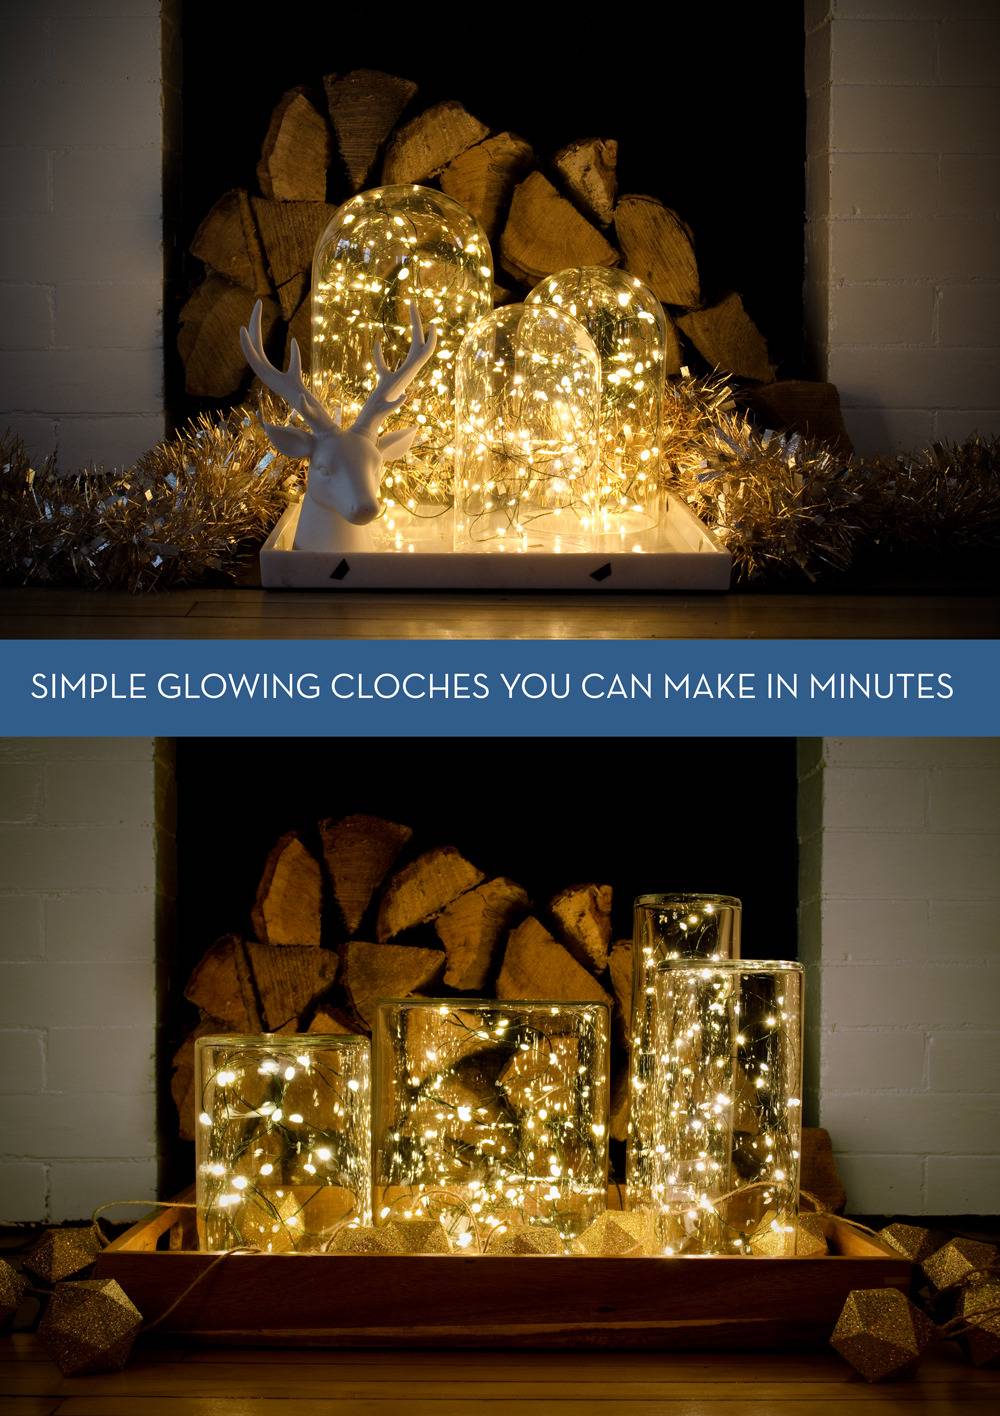 DIY lighted cloches and vases you can make in minutes.